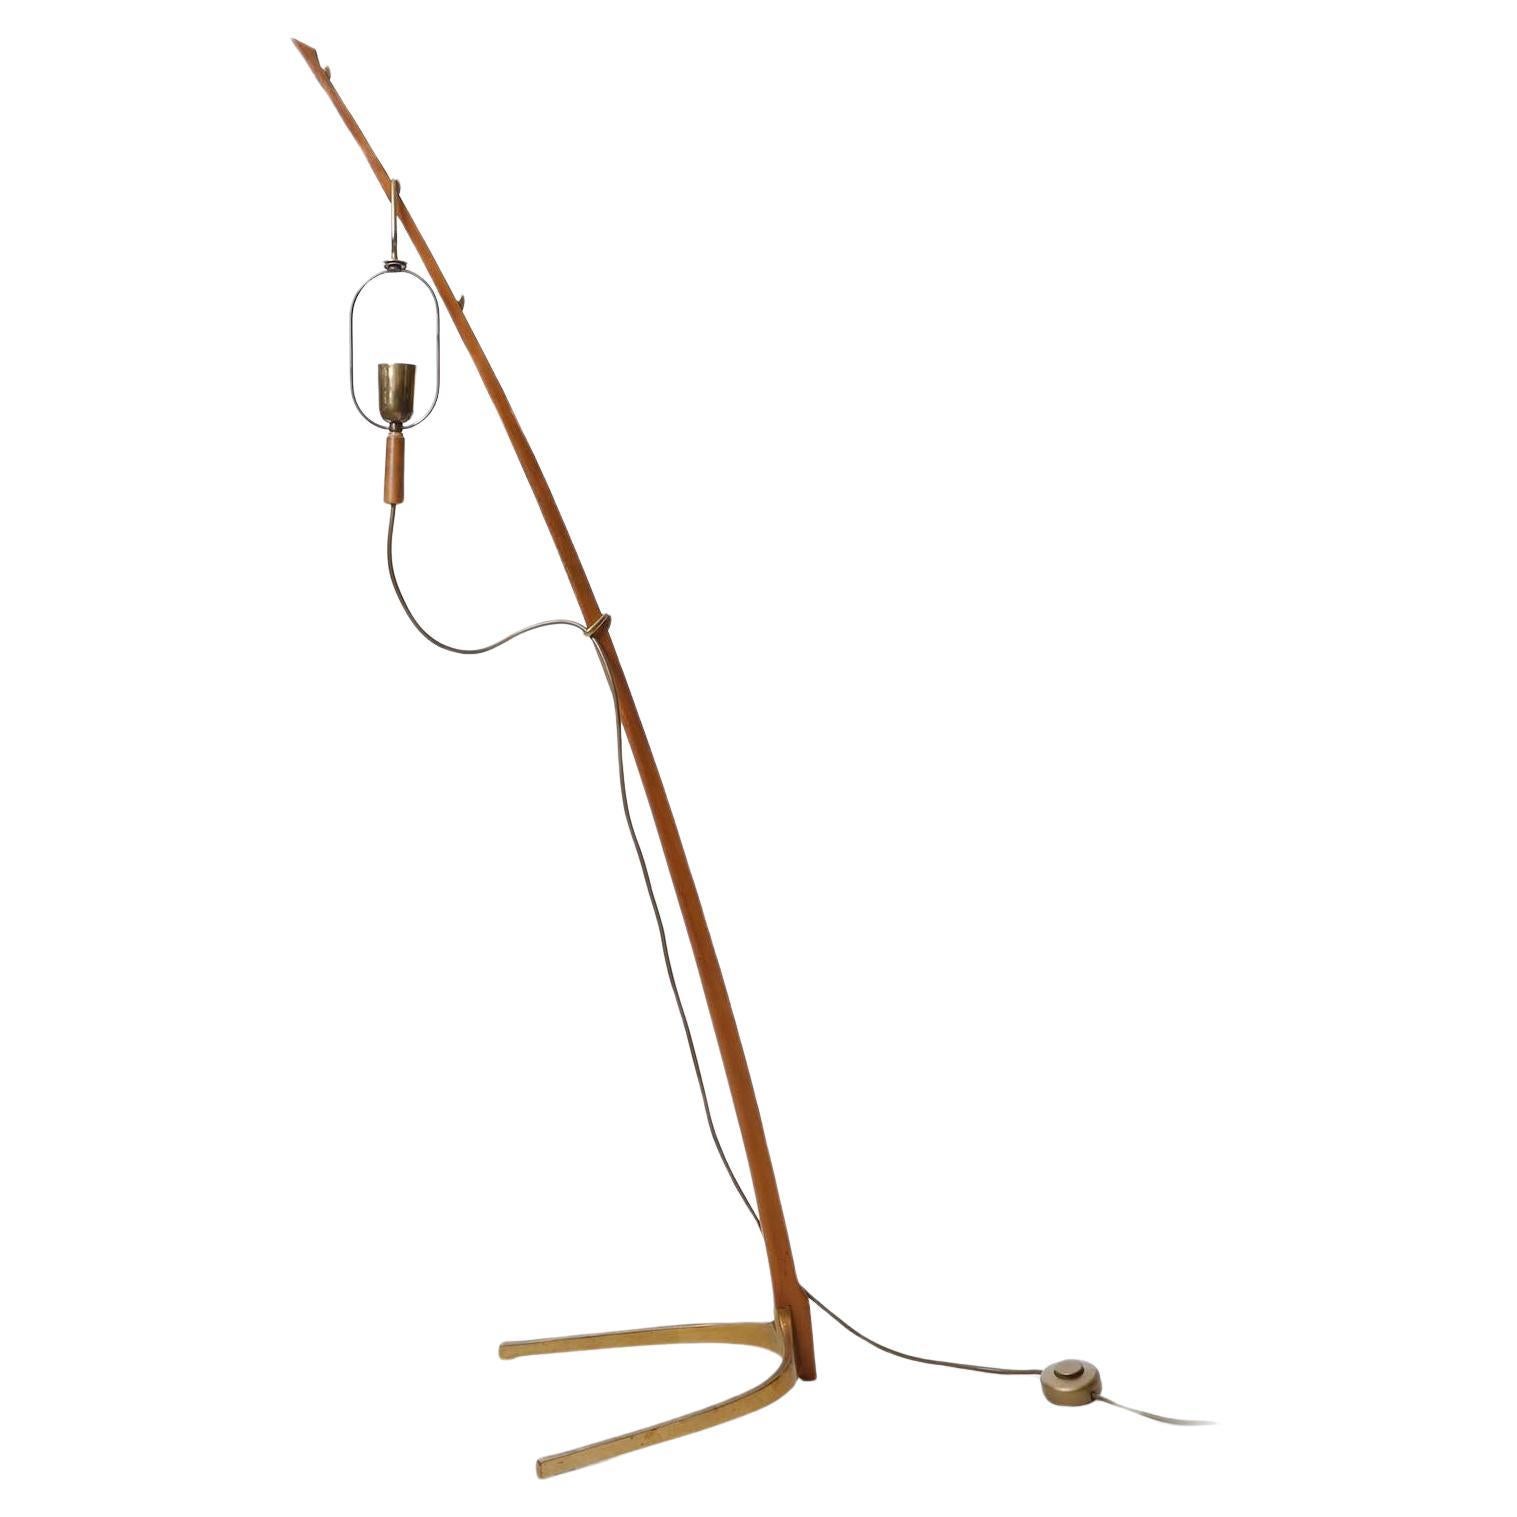 Mid-20th Century Floor Lamp 'Dornstab' No. 2076 by J.T. Kalmar, Patinated Brass Wood Cane, 1960 For Sale